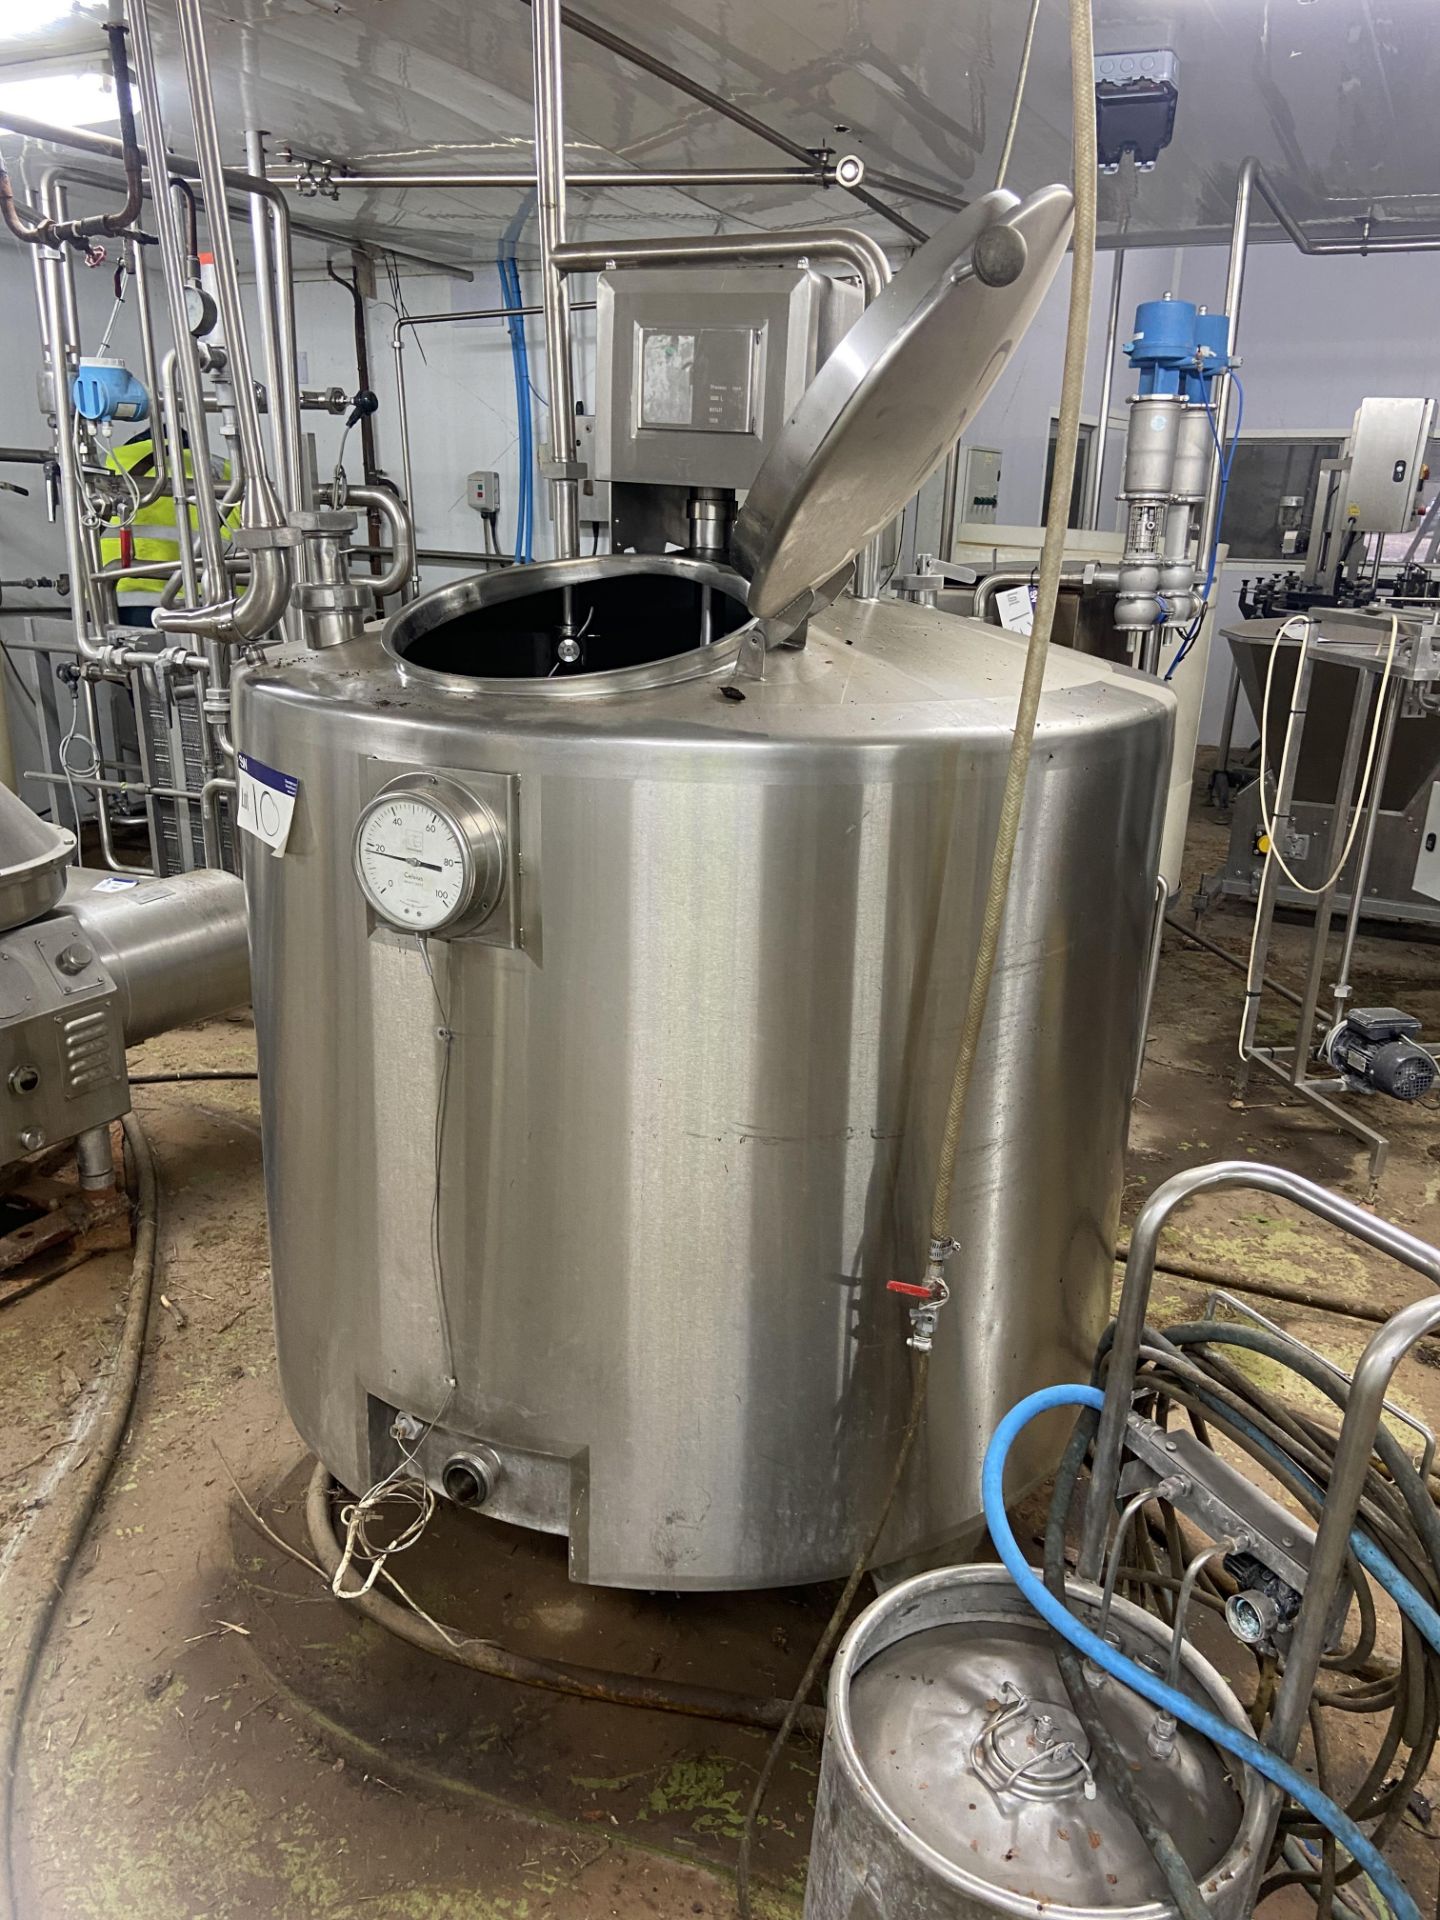 STAINLESS STEEL 1000 litre CREAM MIXING VESSEL, serial no. 881531, approx. 1.3m x 1.1m deep, with